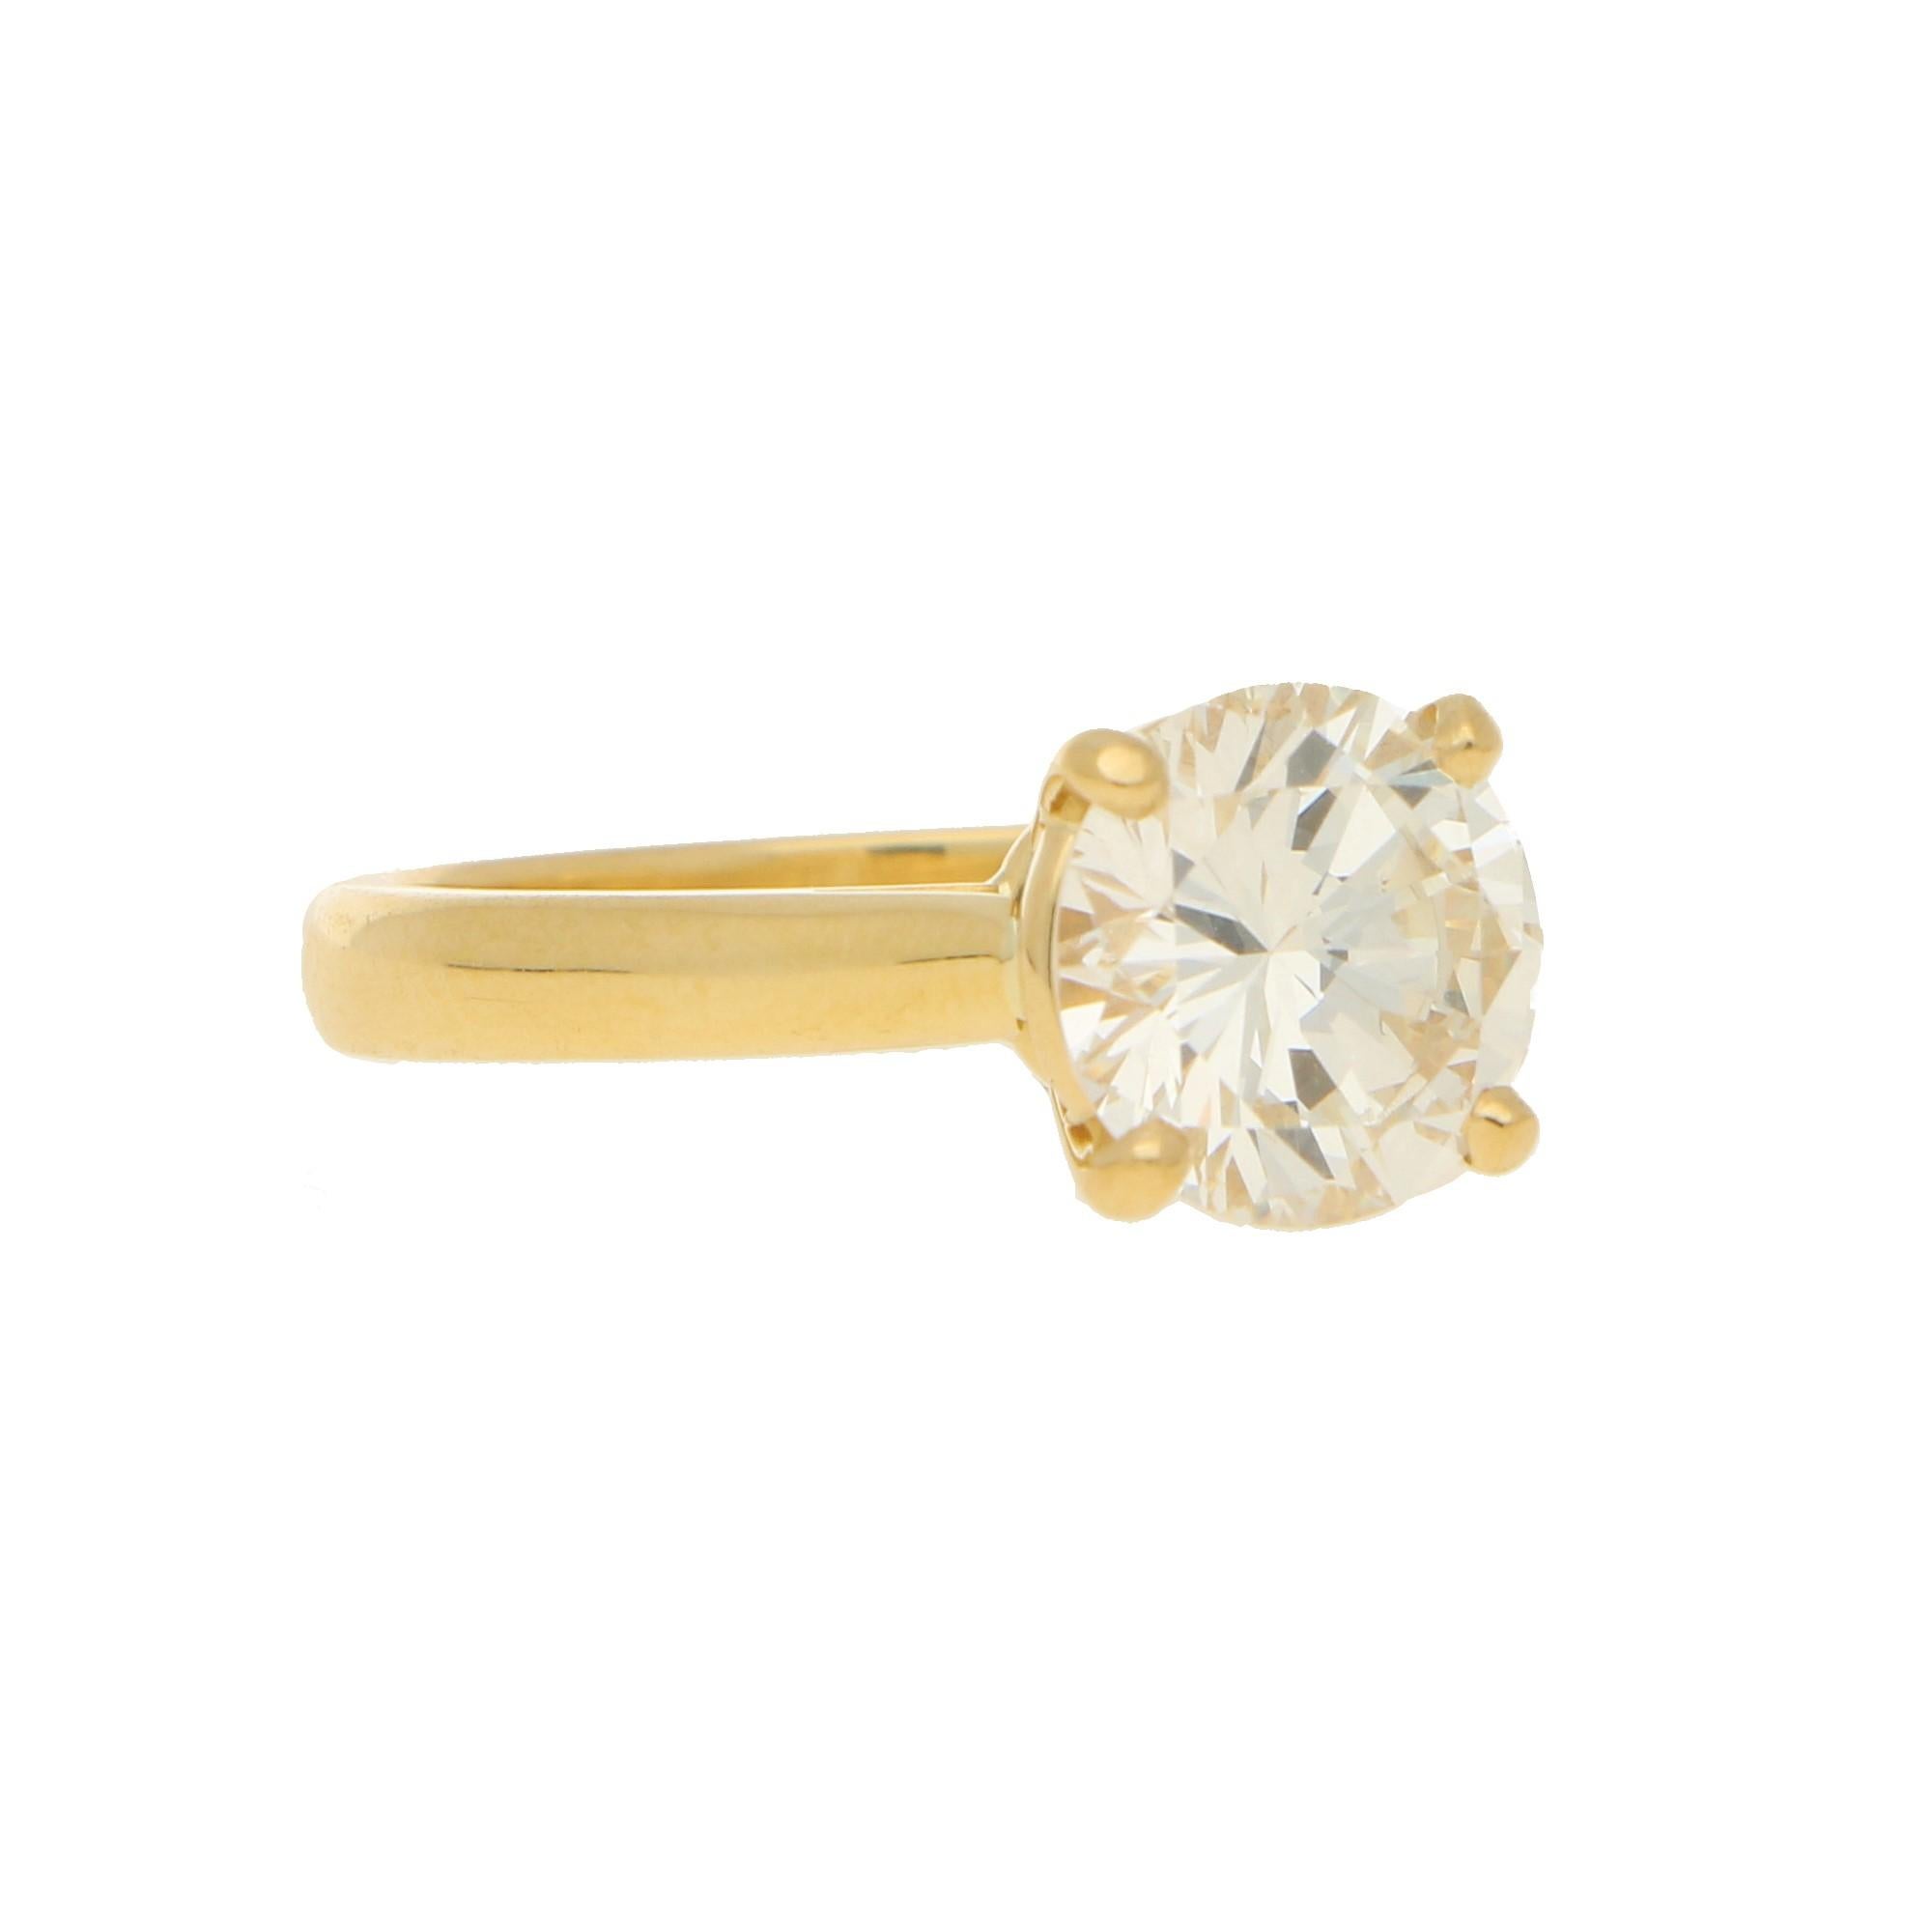 Round Cut Certified Diamond Solitaire Engagement Ring Set in 18k Yellow Gold